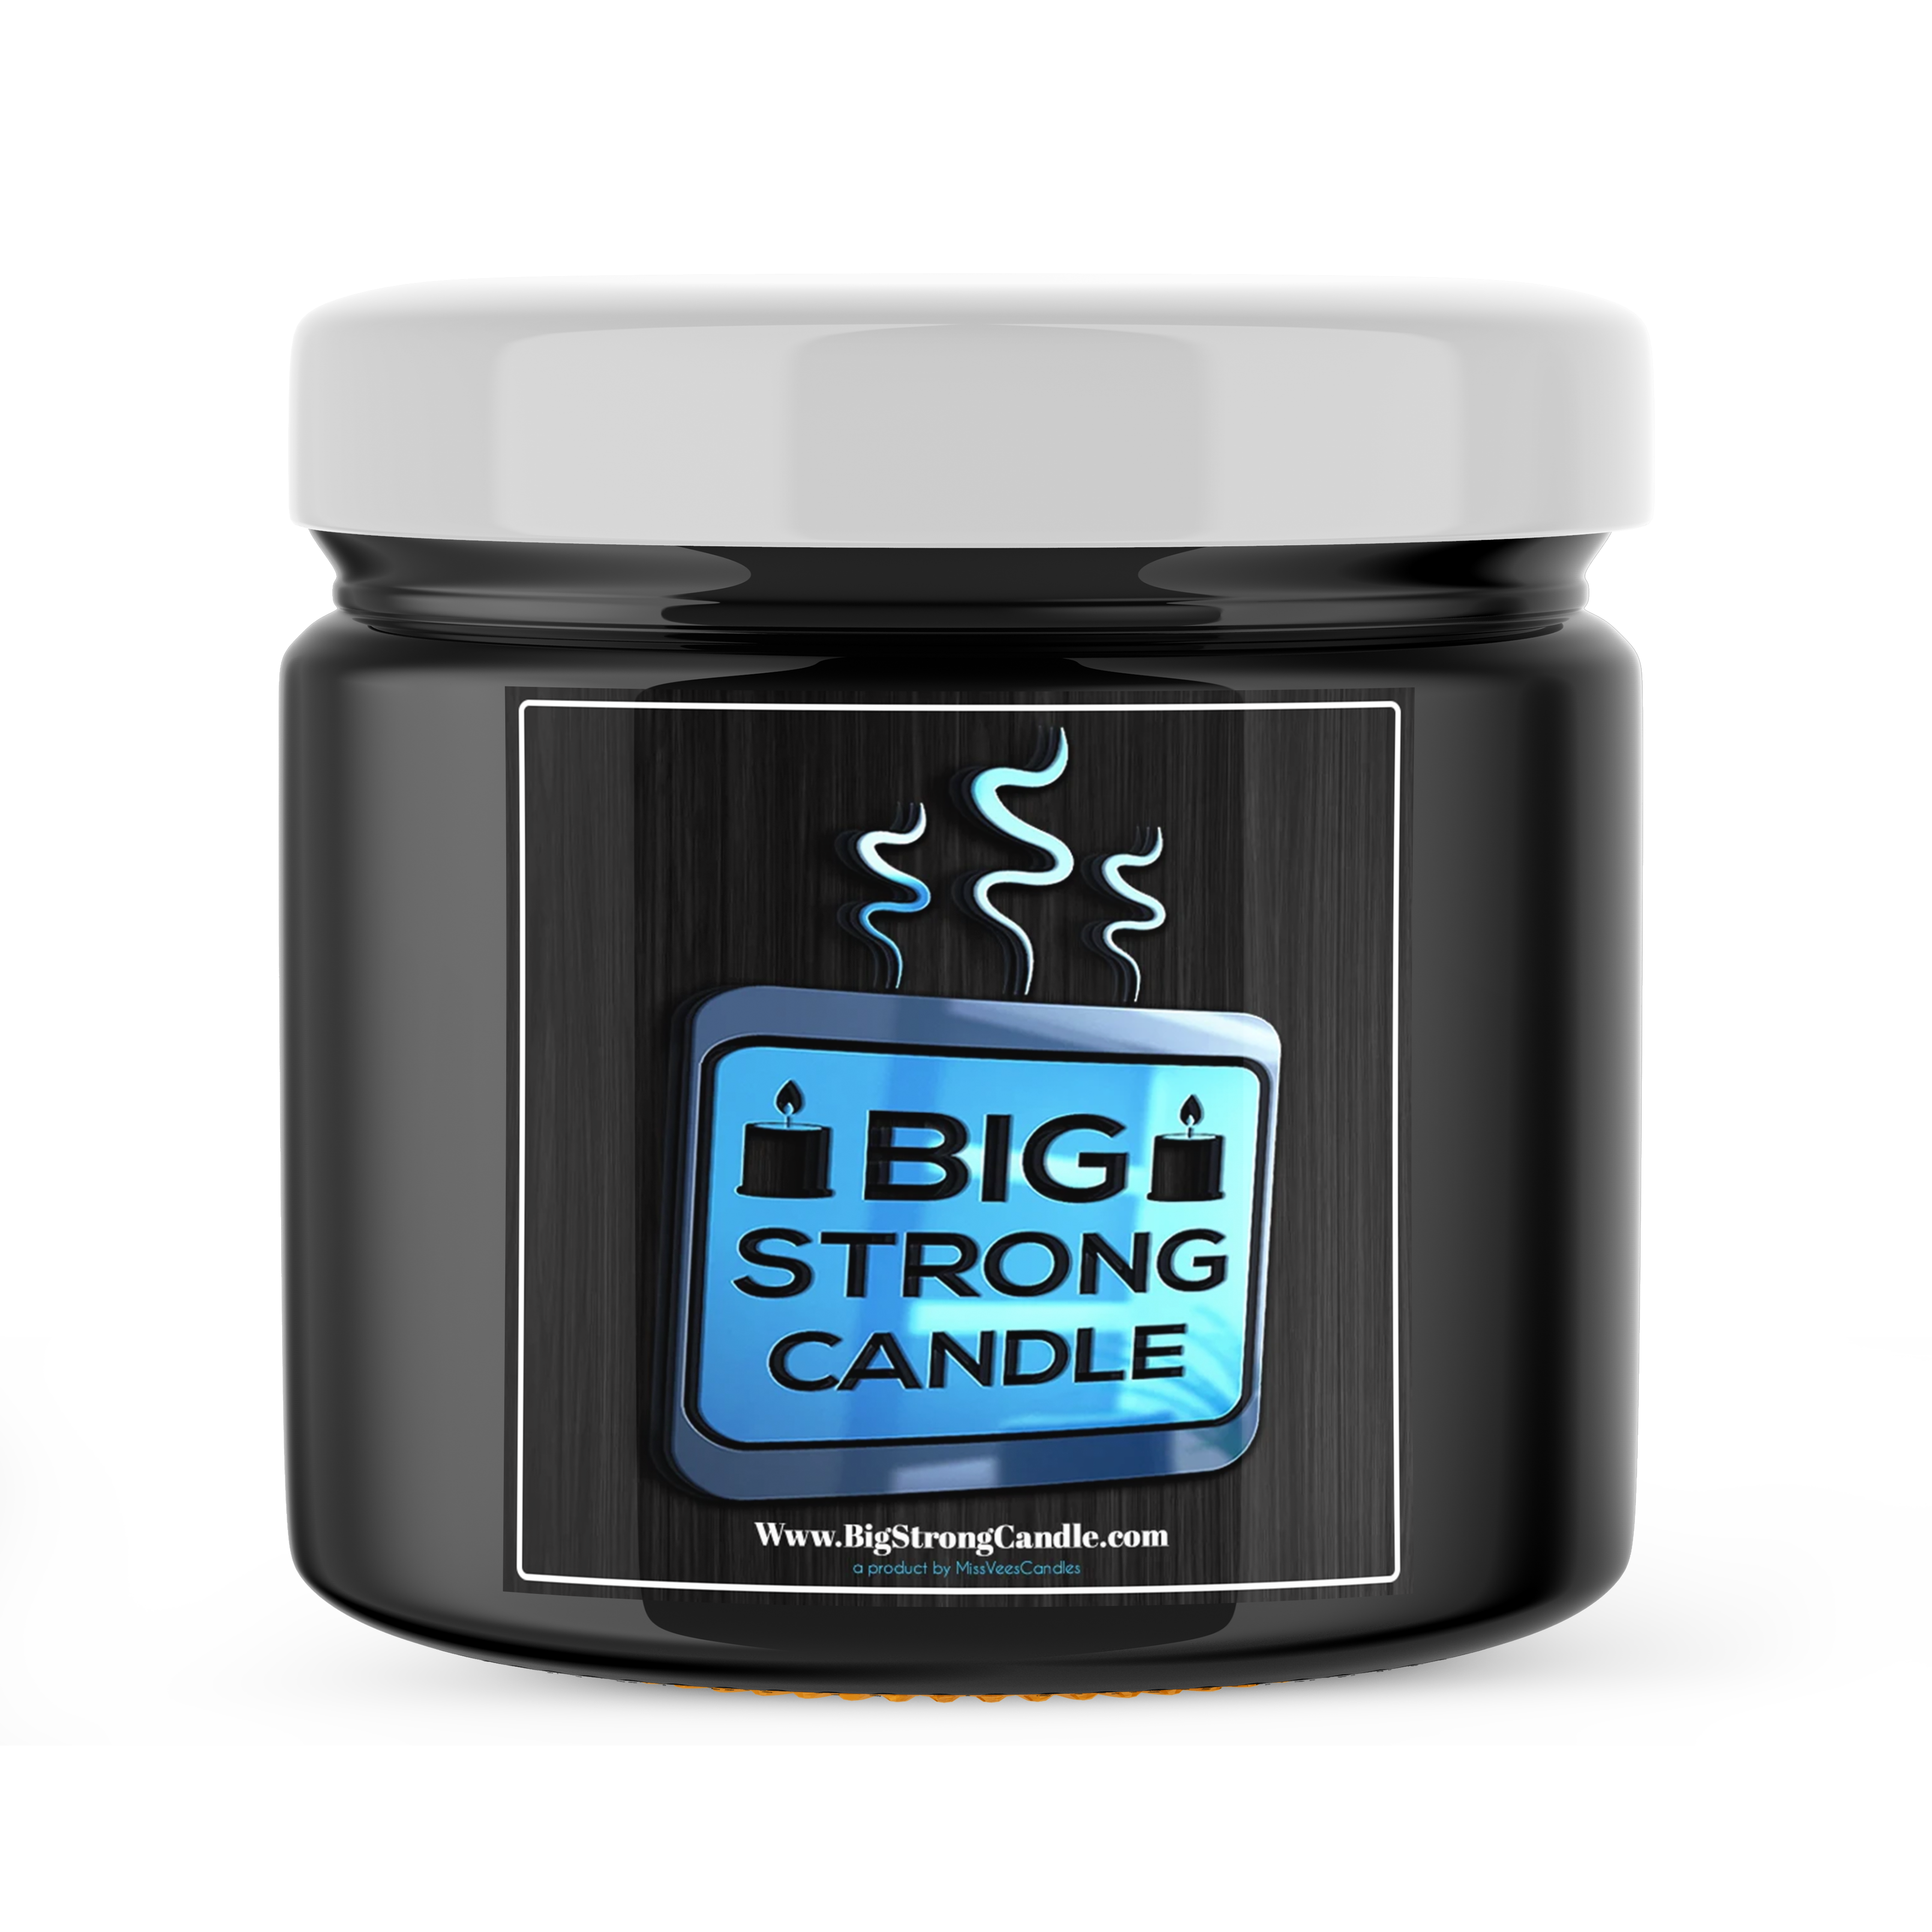 This 3 wick 16oz. BIG STRONG CANDLE smells just like the popular car freshener scent! Top notes of lemon, eucalyptus, and mint. Mid notes of lavender, clove, and jasmine all on a dry bed of vetiver, cedarwood, and oakmoss.